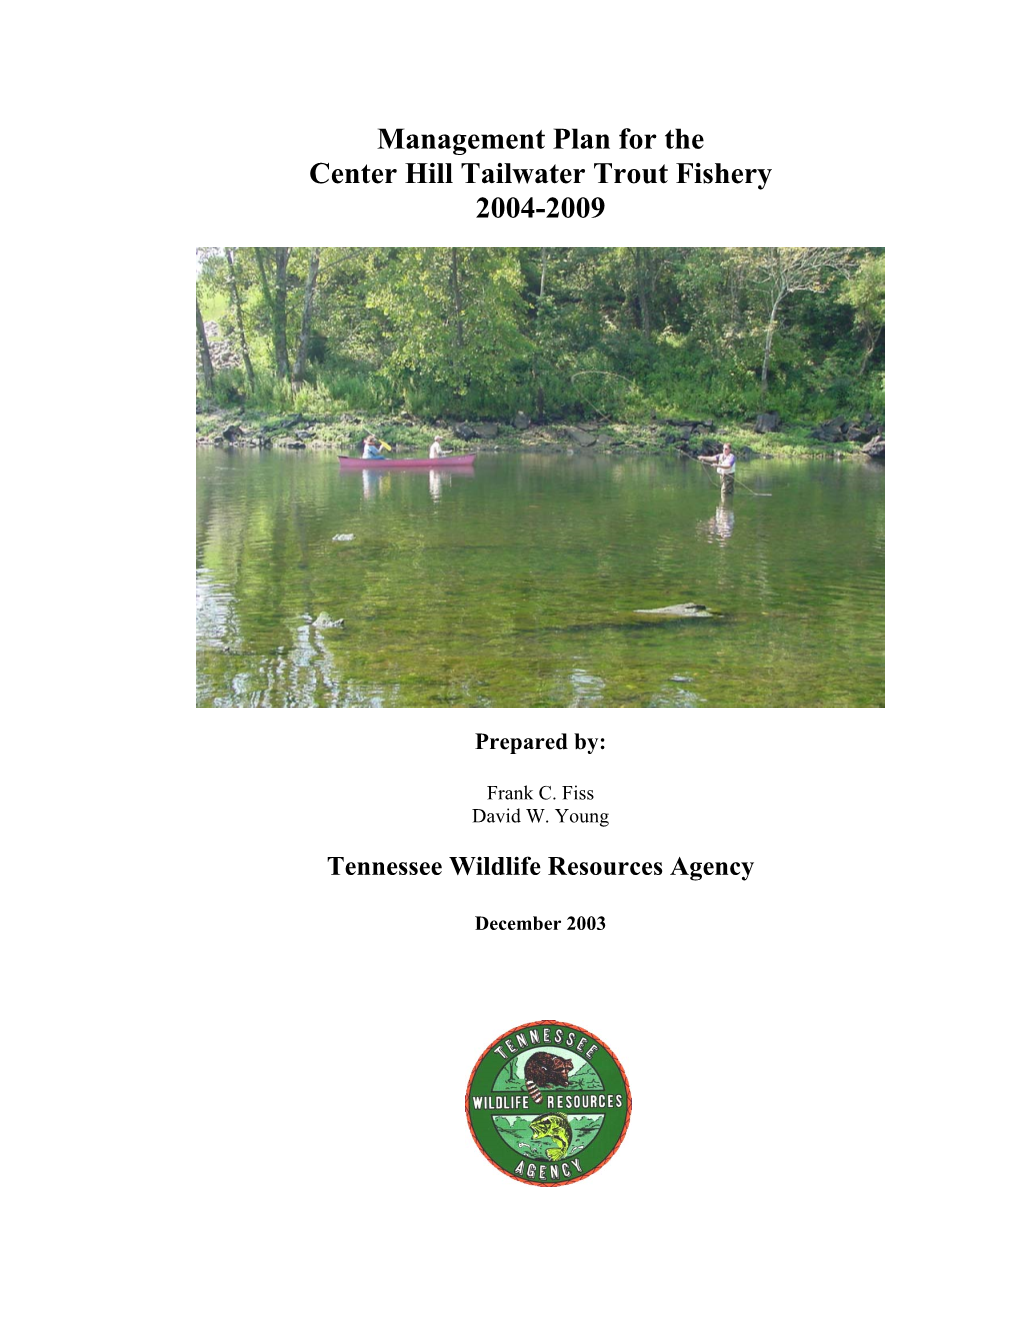 Management Plan for the Center Hill Tailwater Trout Fishery 2004-2009